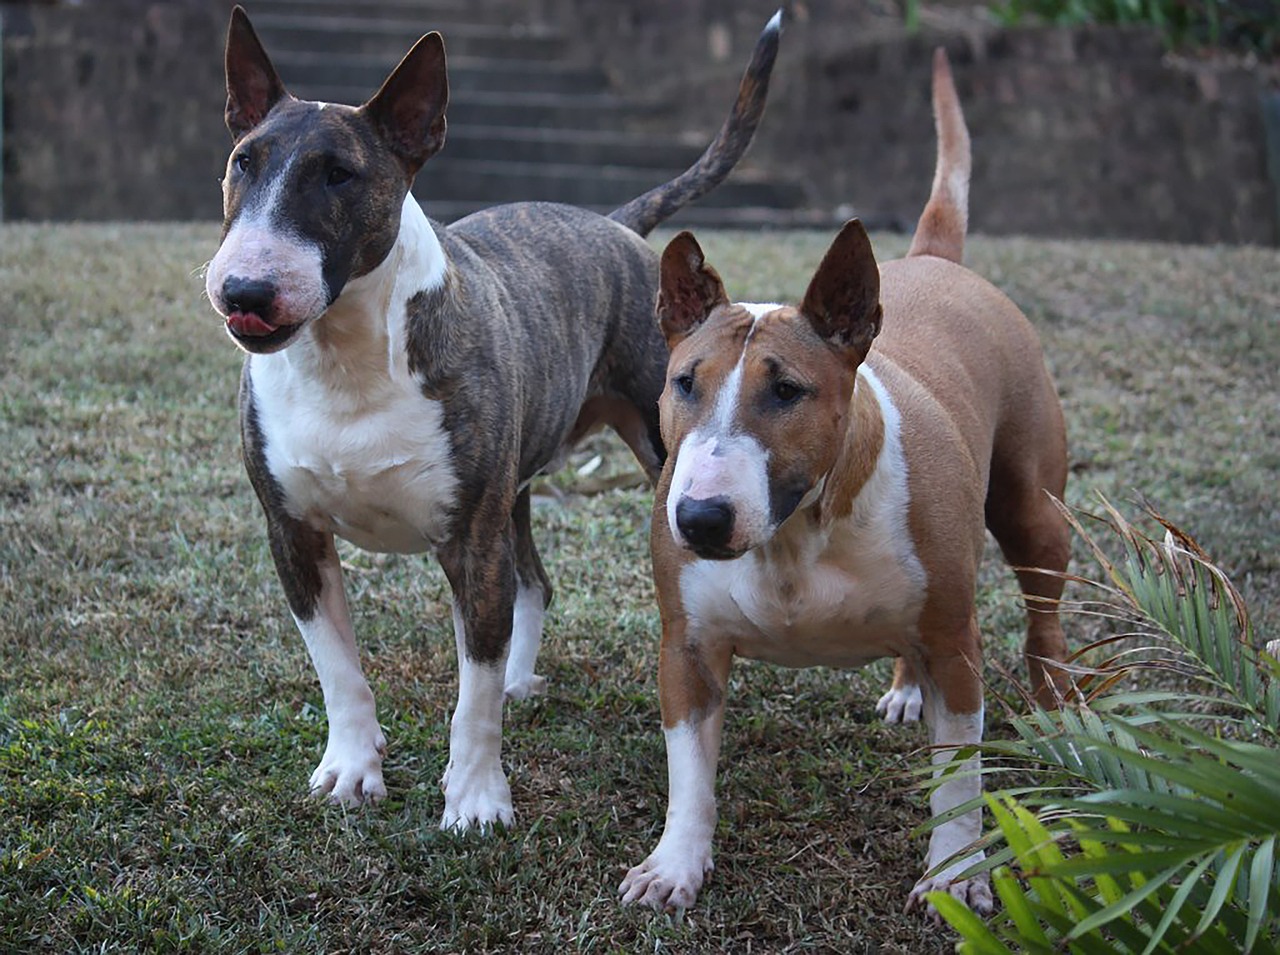 Can a Bull Terrier Live in An Apartment?